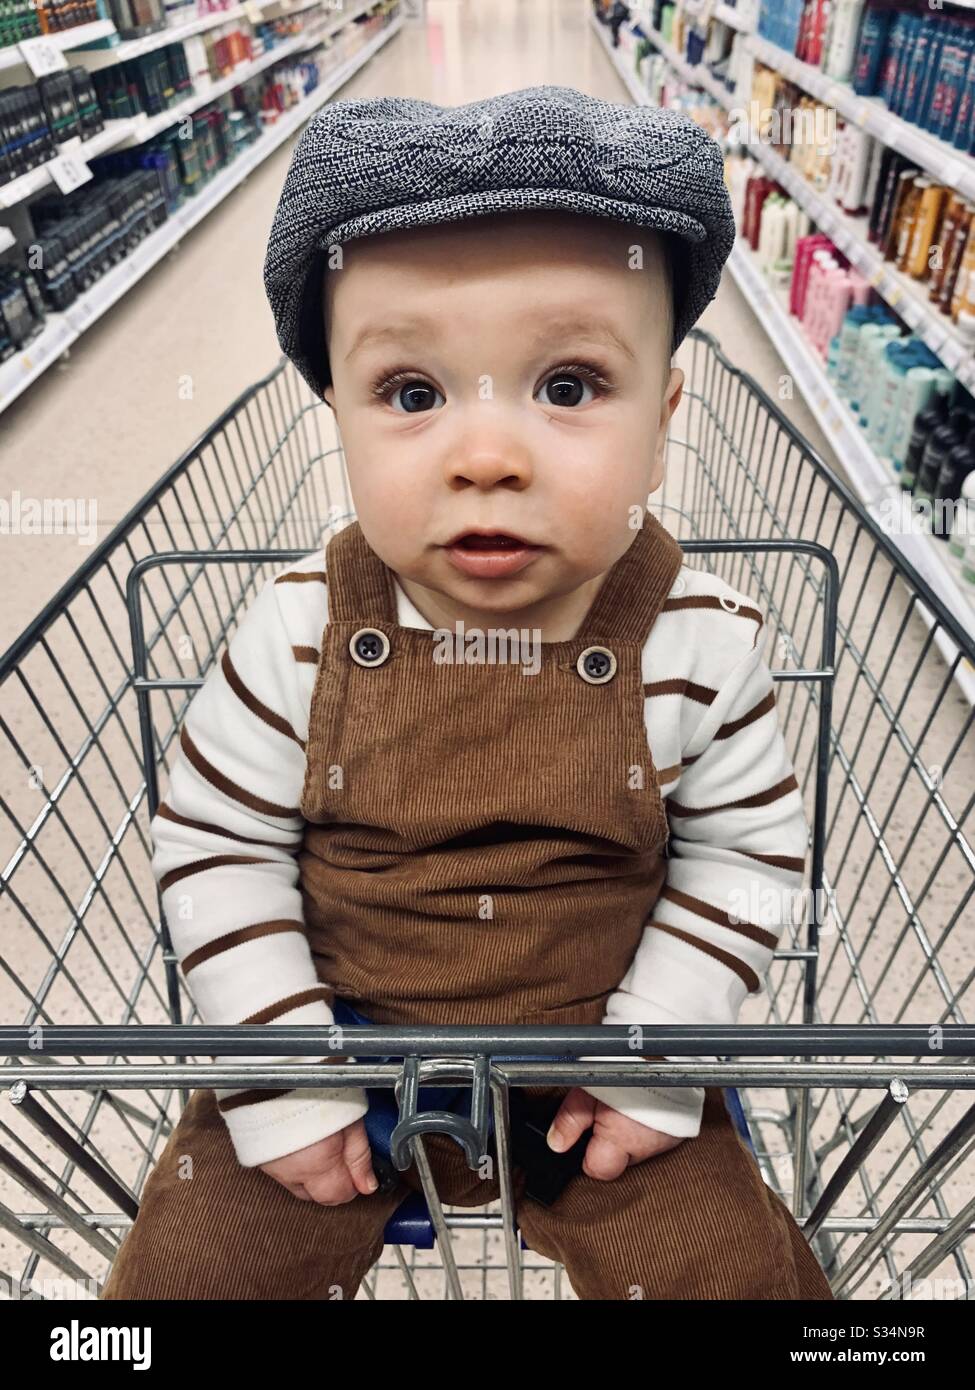 Baby in Yorkshire flat cap shopping trolly Stock Photo